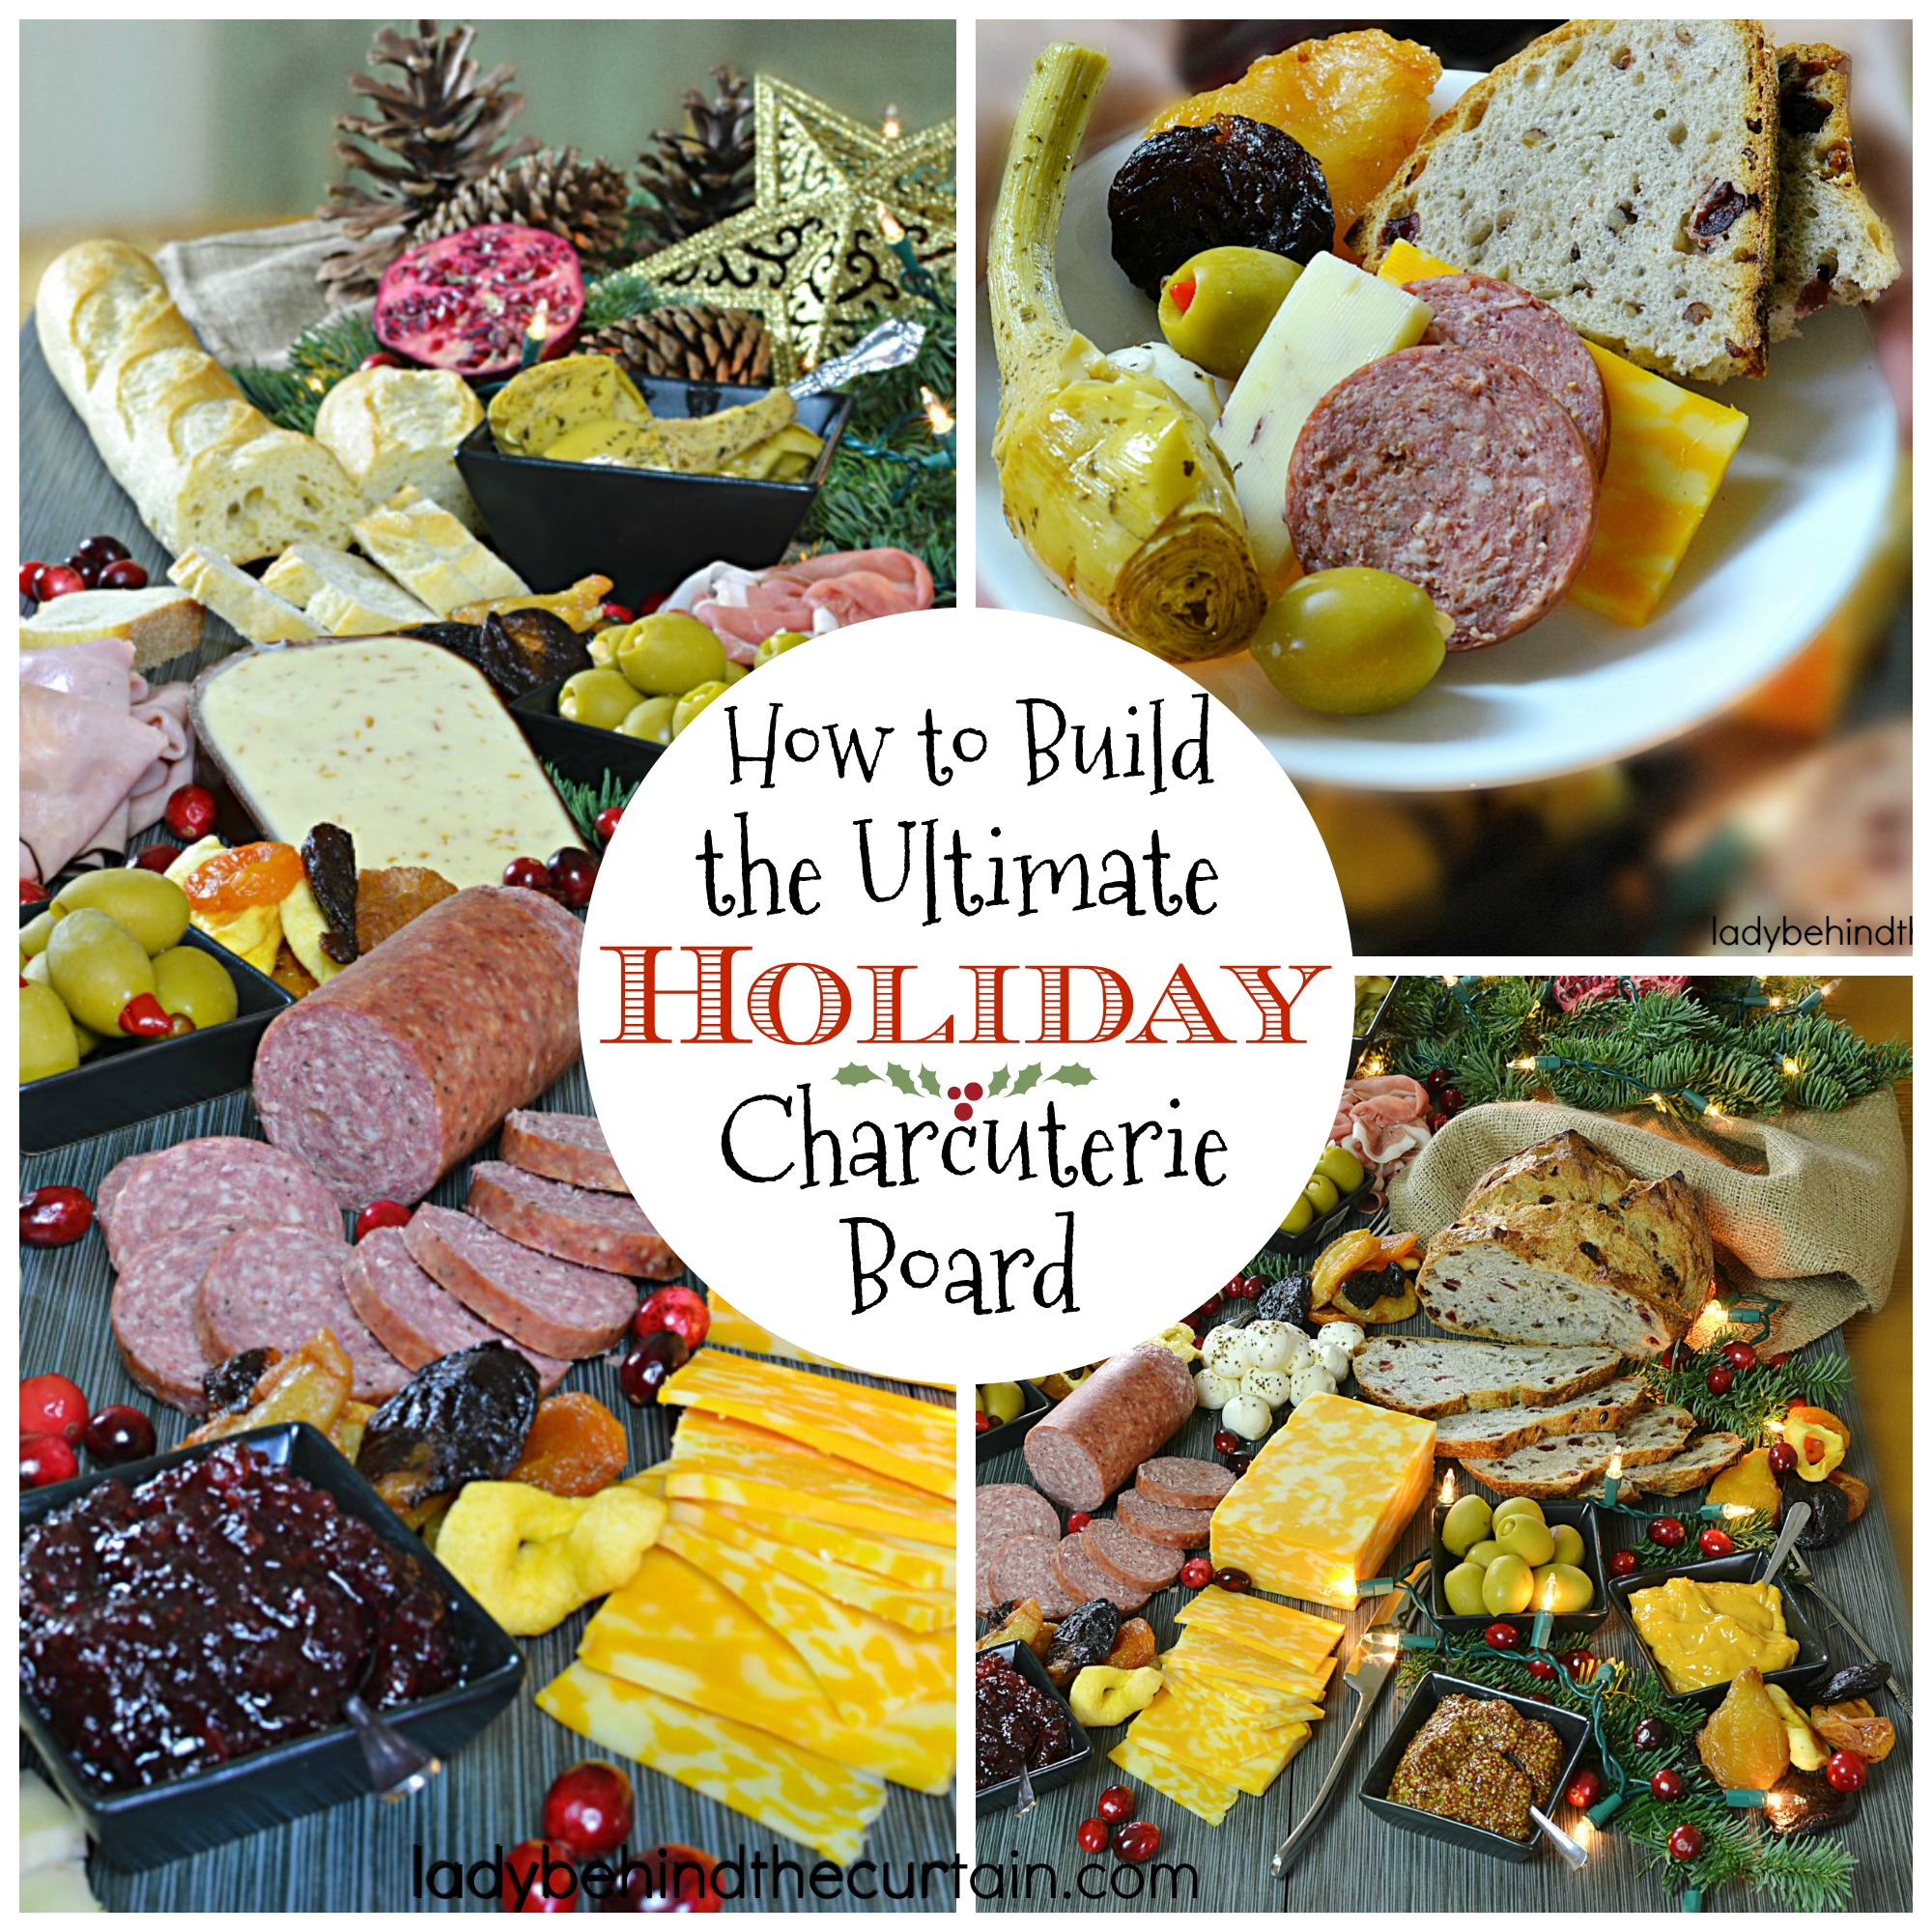 How-to-Build-the-Ultimate-Holiday-Charcuterie-Board-8